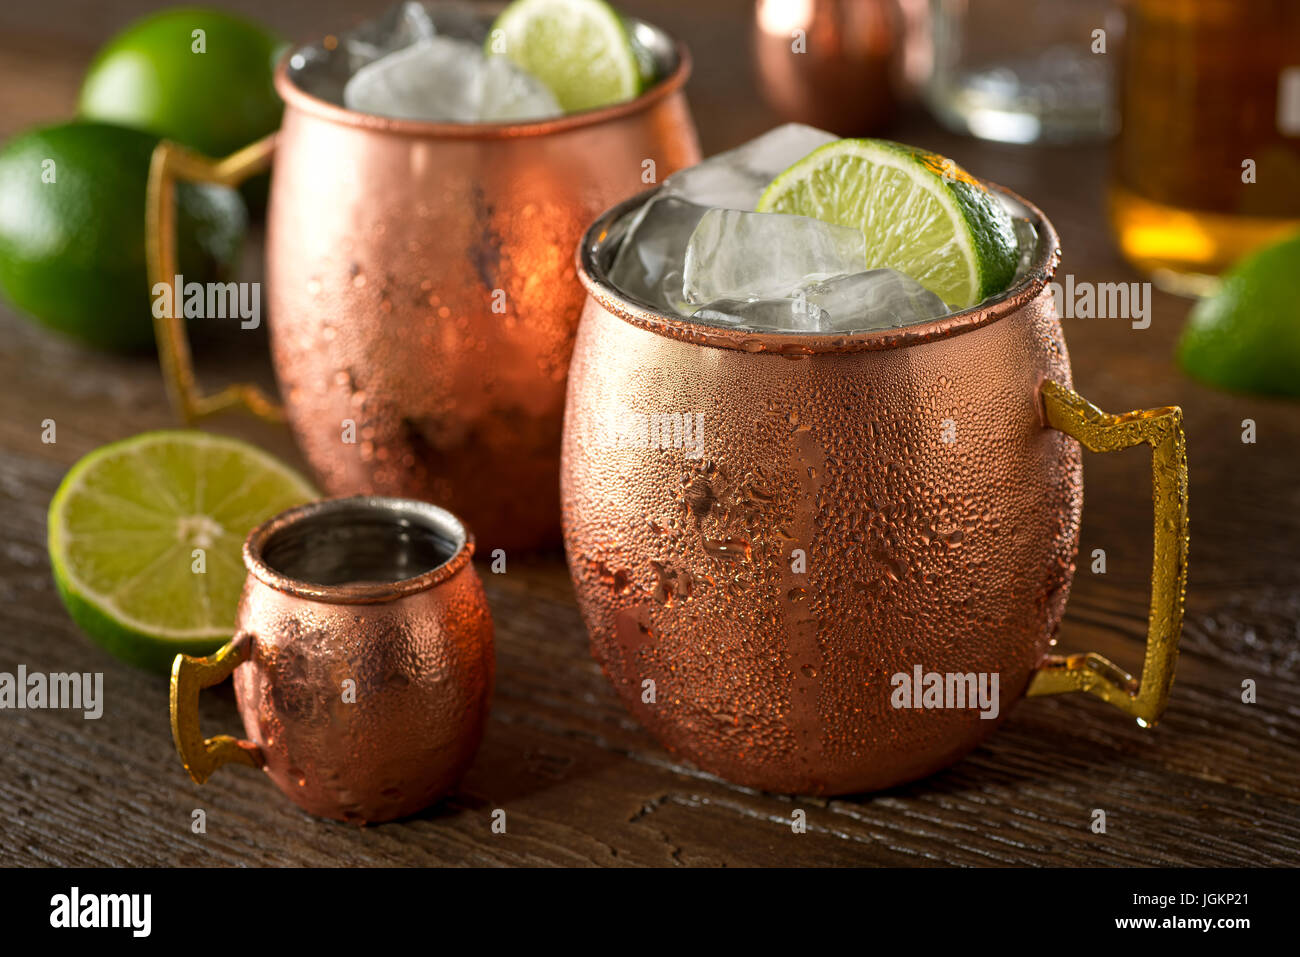 A delicious moscow mule cocktail with vodka, ginger beer, lime juice and ice. Stock Photo